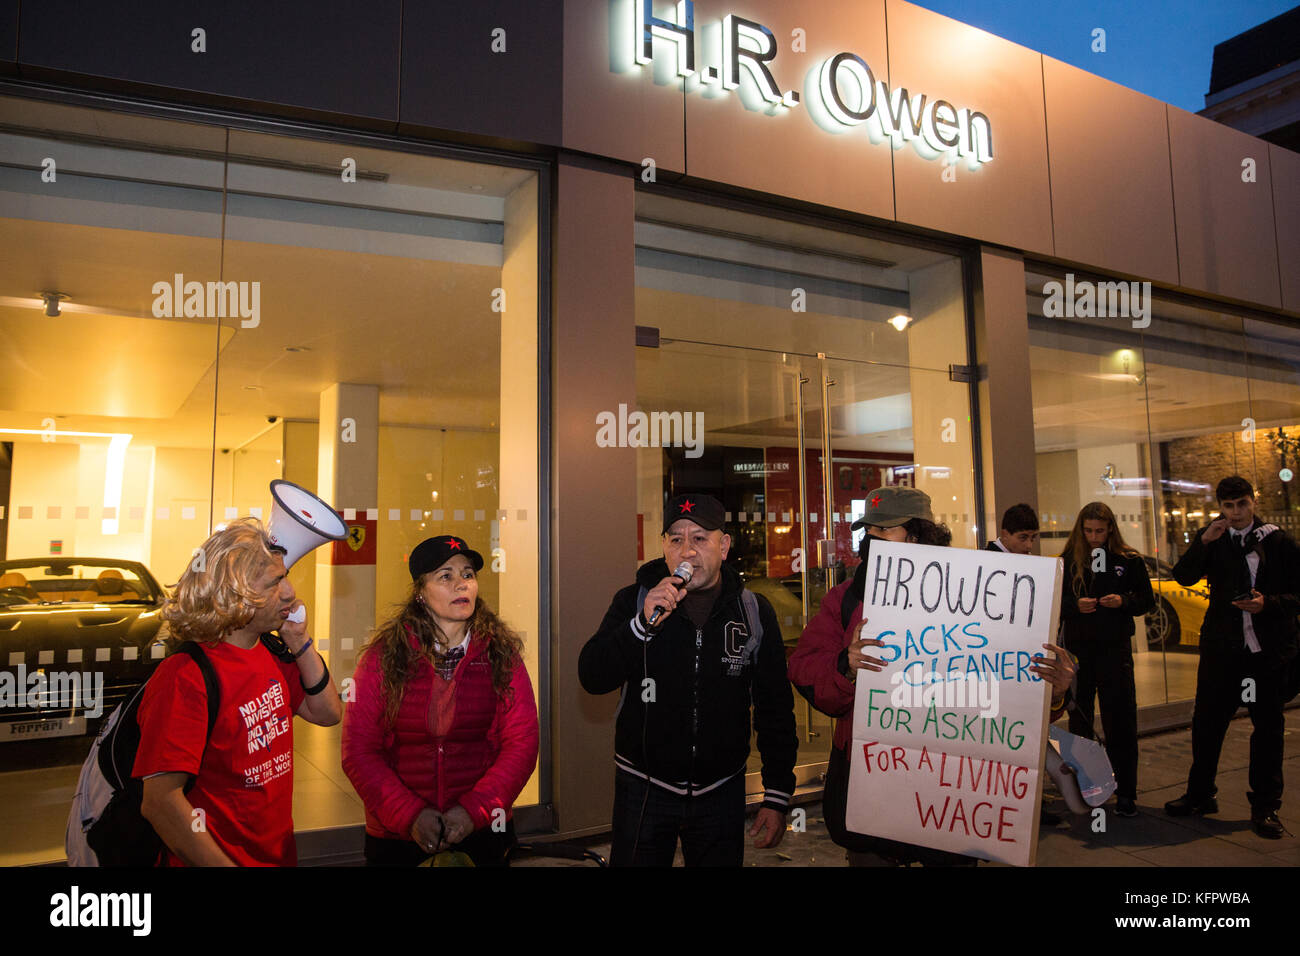 London, UK. 31st Oct, 2017. Fredy Lopez addresses supporters outside luxury car dealer H.R. Owen's Ferrari showroom in South Kensington. He and Angelica Valencia Bolanos, suspended without pay by contractor Templewood Cleaning for having joined trade union United Voices of the World and for having voted to strike for the London Living Wage, are the only cleaners responsible for cleaning H.R. Owen's Ferrari showroom via contractor Templewood Cleaning. Credit: Mark Kerrison/Alamy Live News Stock Photo